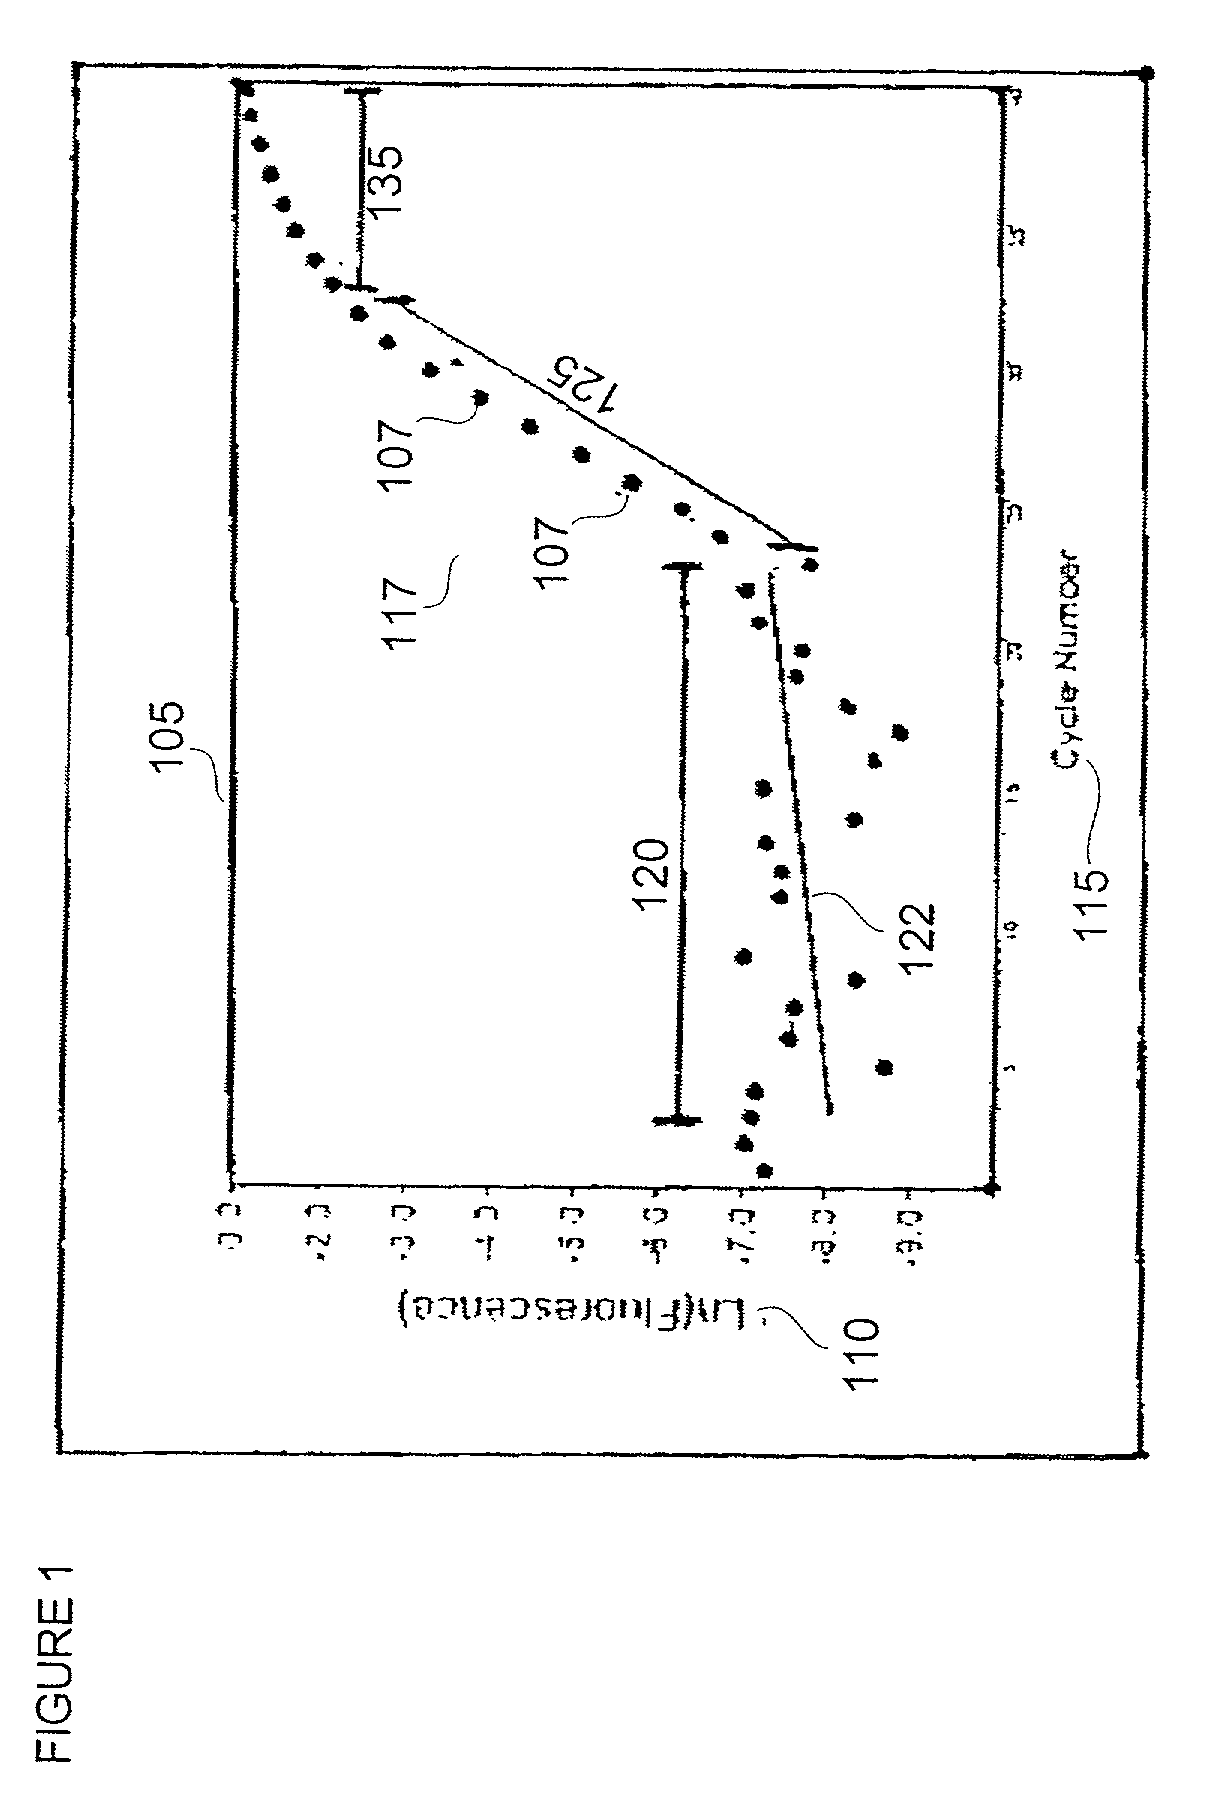 Automatic threshold setting for quantitative polymerase chain reaction